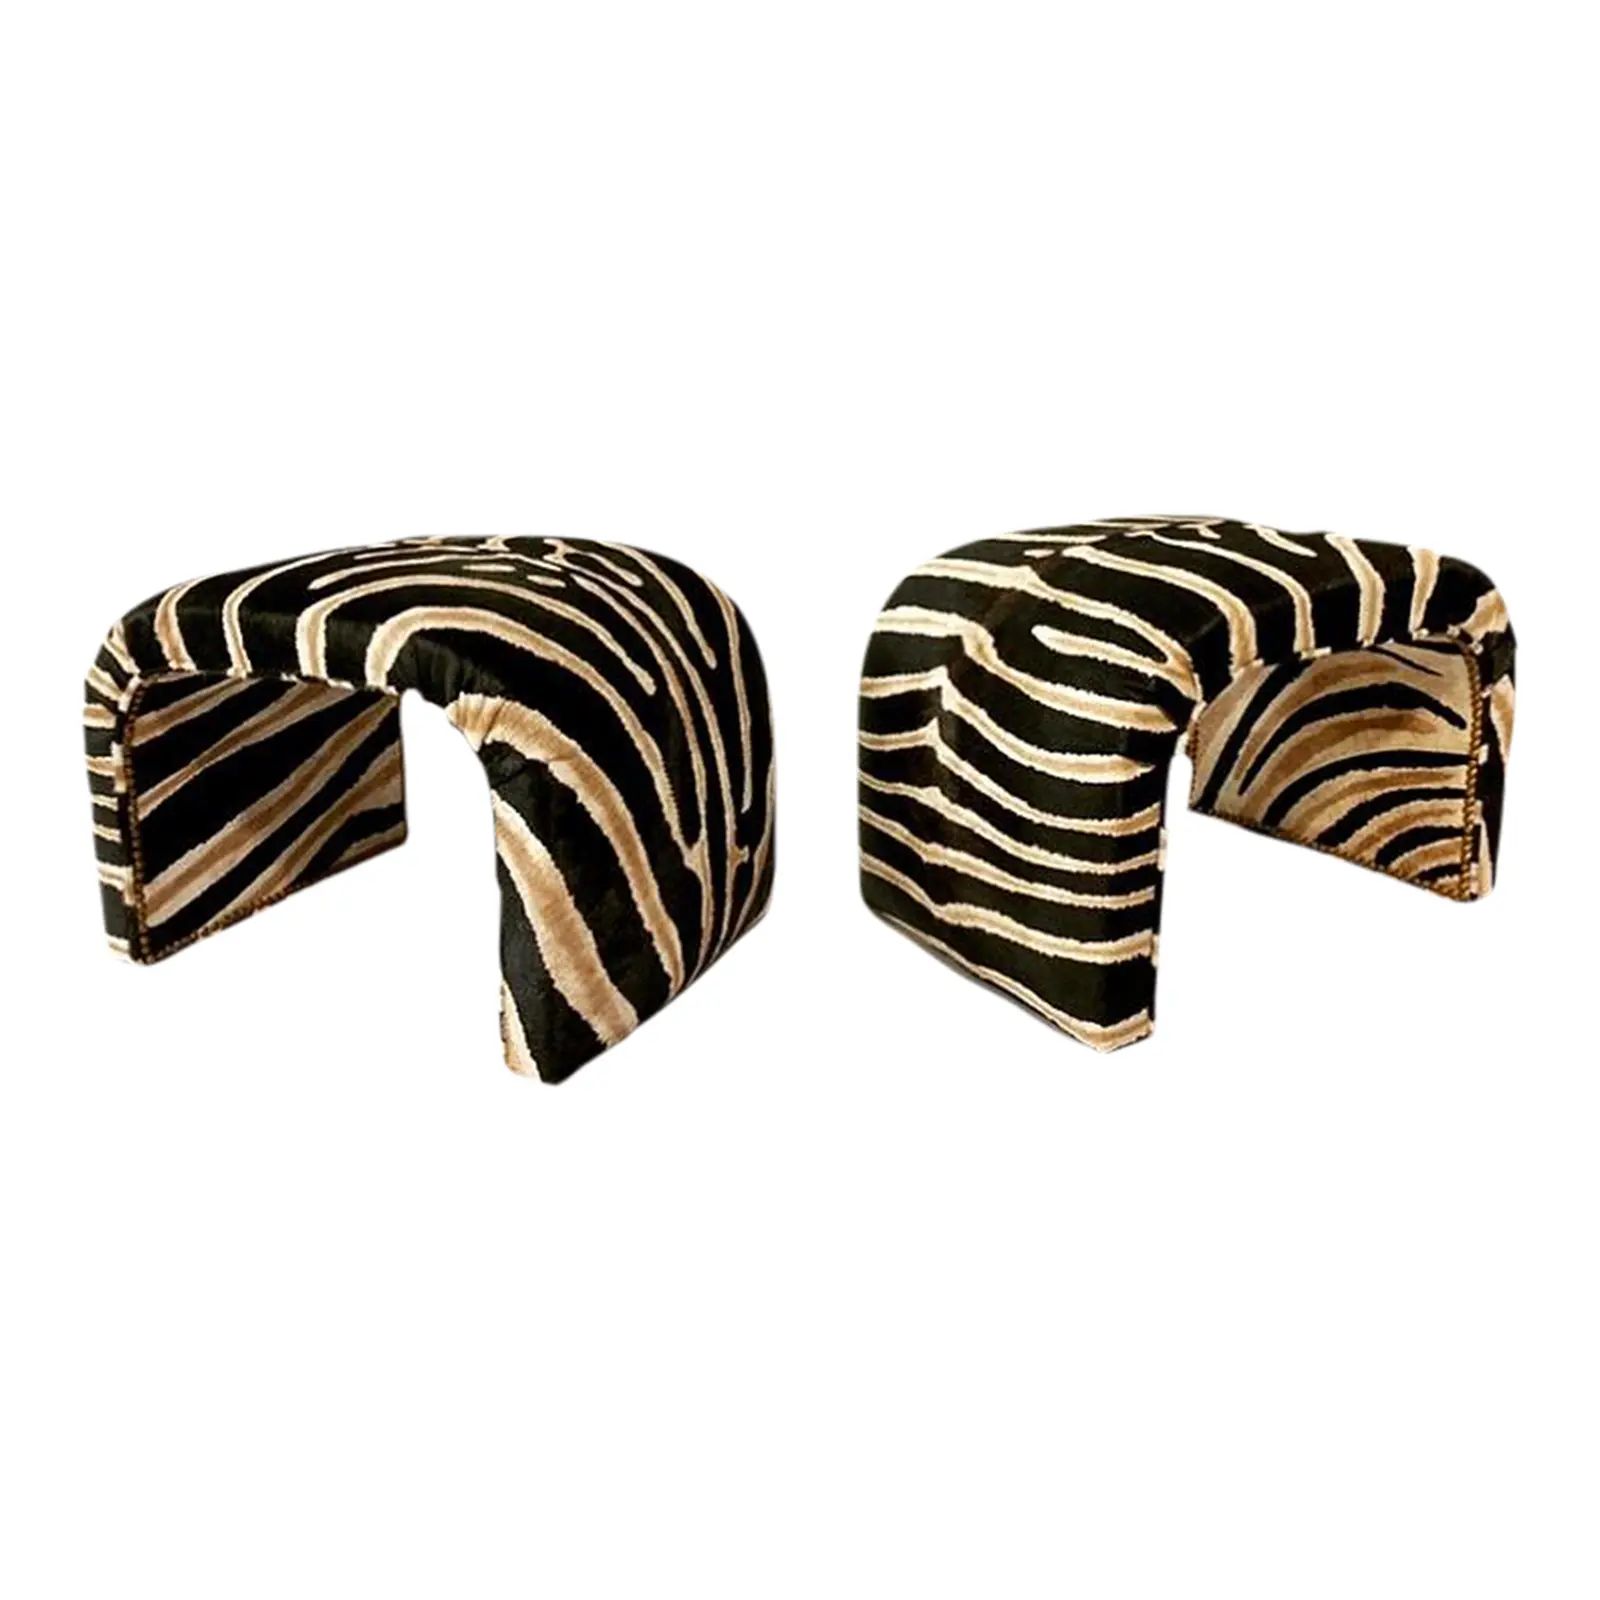 Waterfall Ottomans Stools in Zebra Stenciled Cowhide, a Pair | Chairish